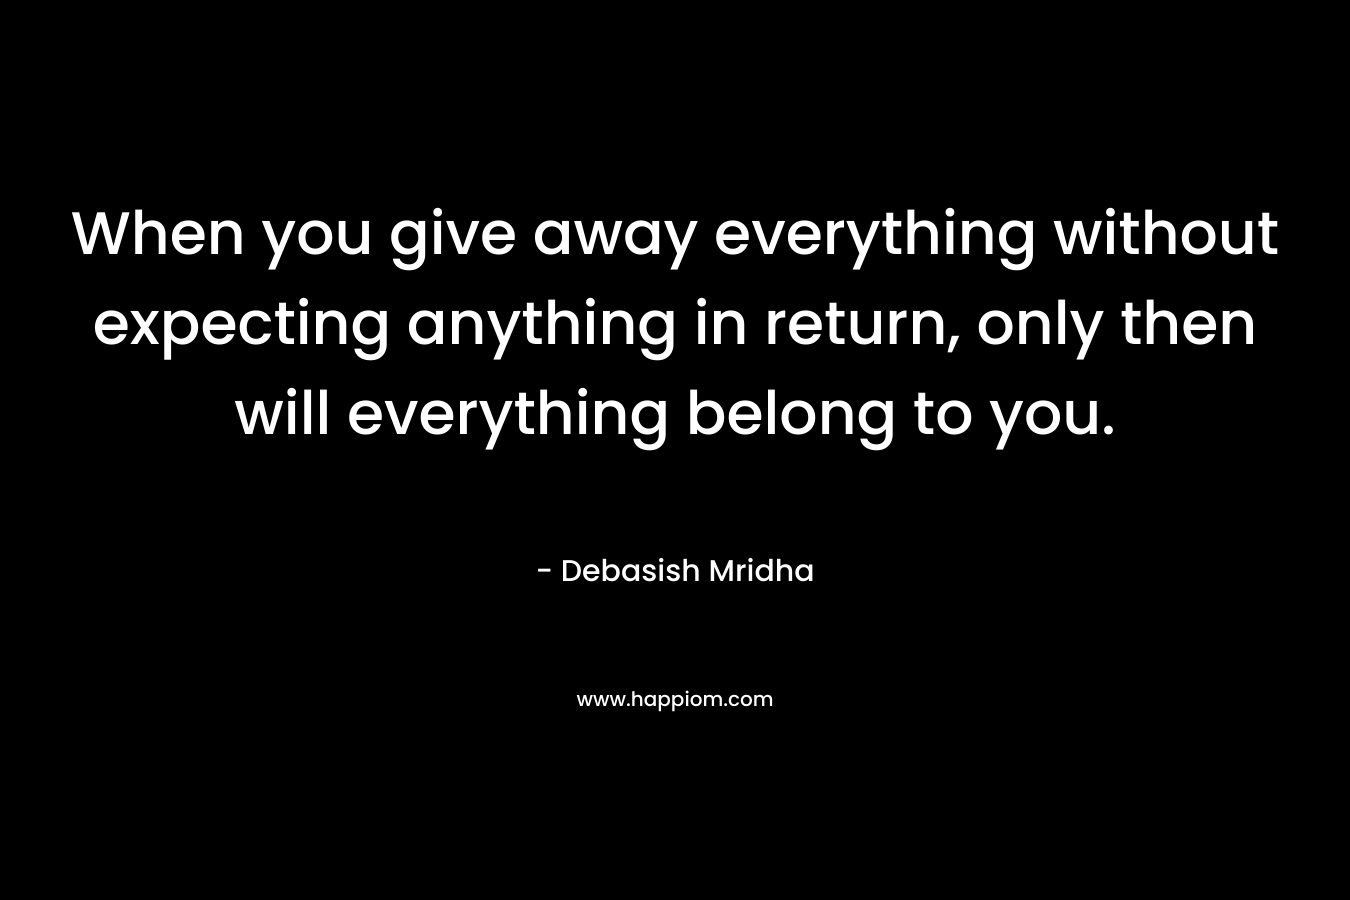 When you give away everything without expecting anything in return, only then will everything belong to you.